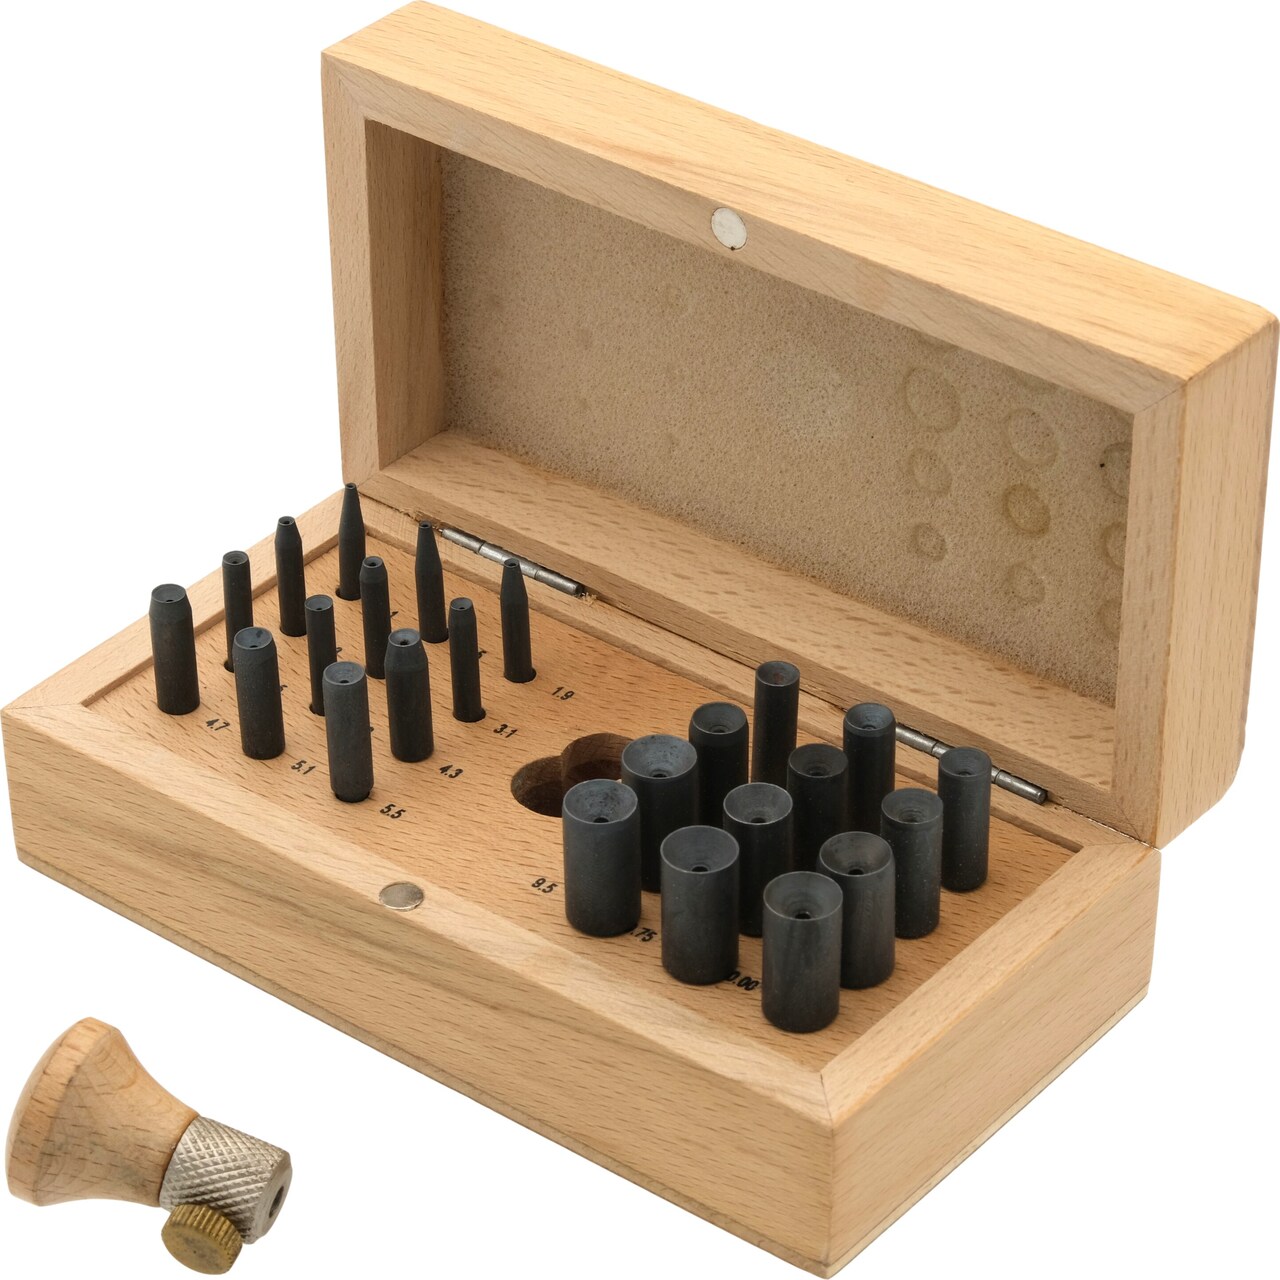 Set of 24 Bezel Setting Punches in Wooden Box